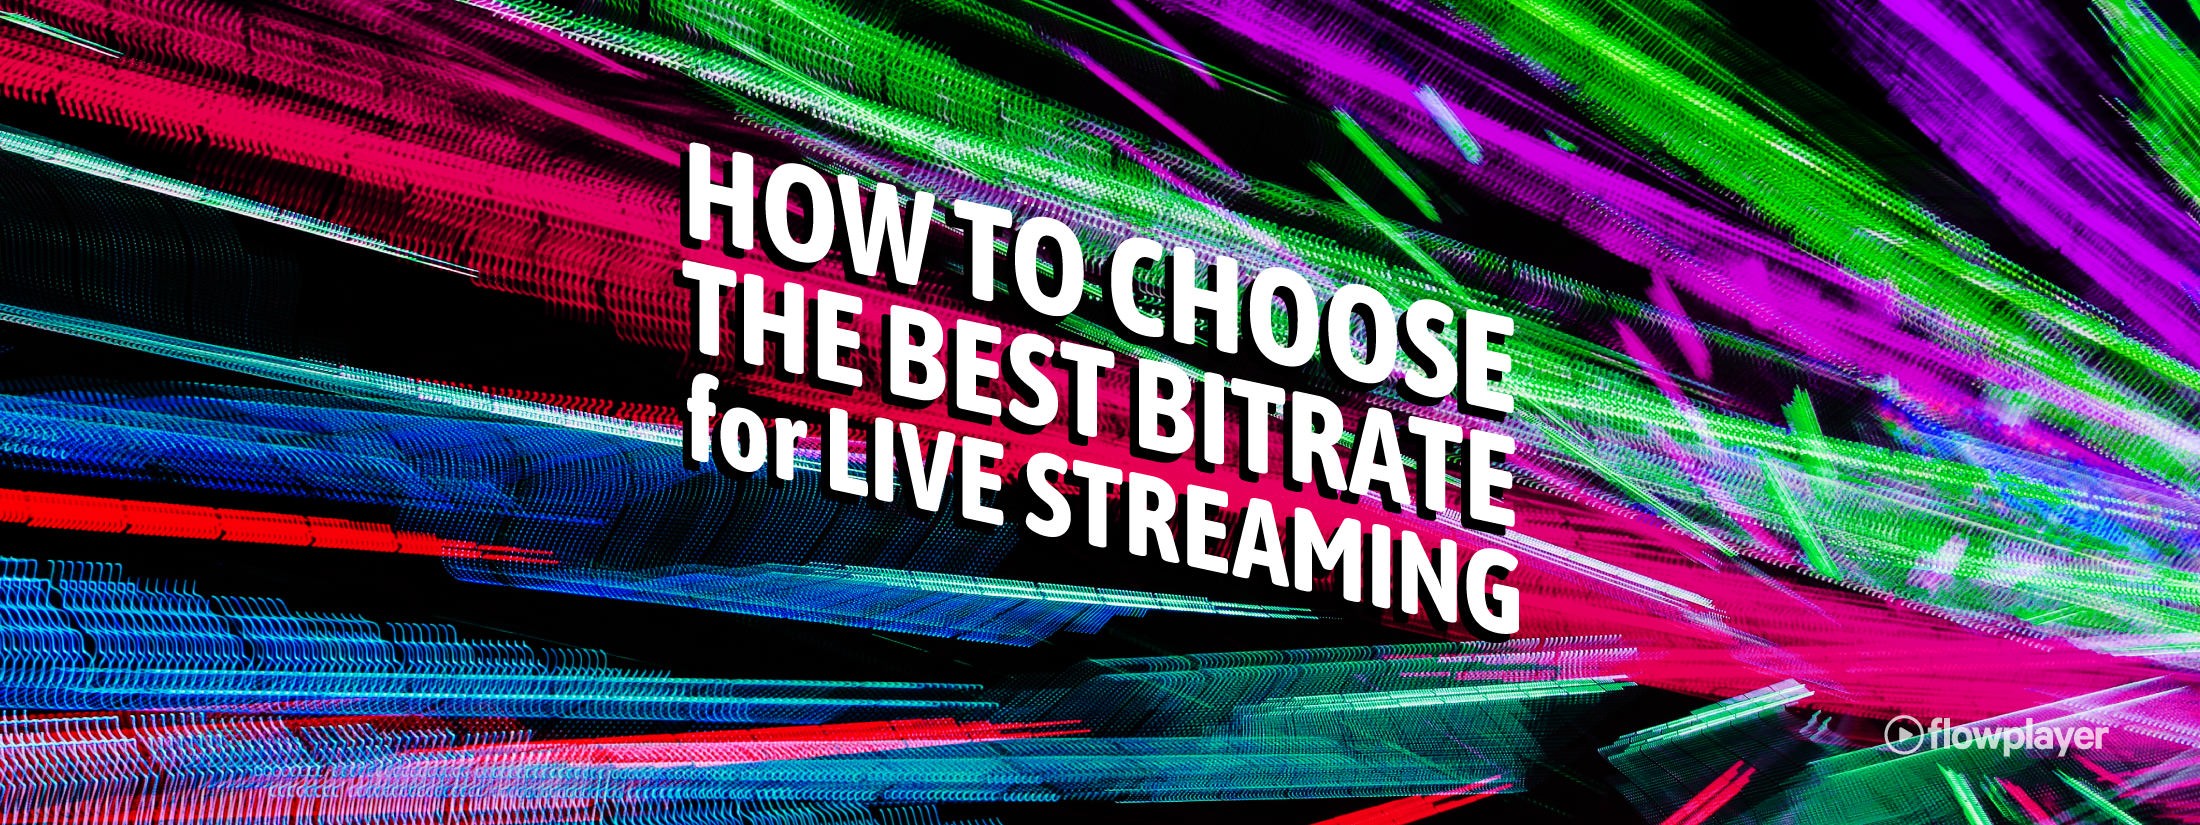 How to Choose the Best Bitrate for Live Streaming